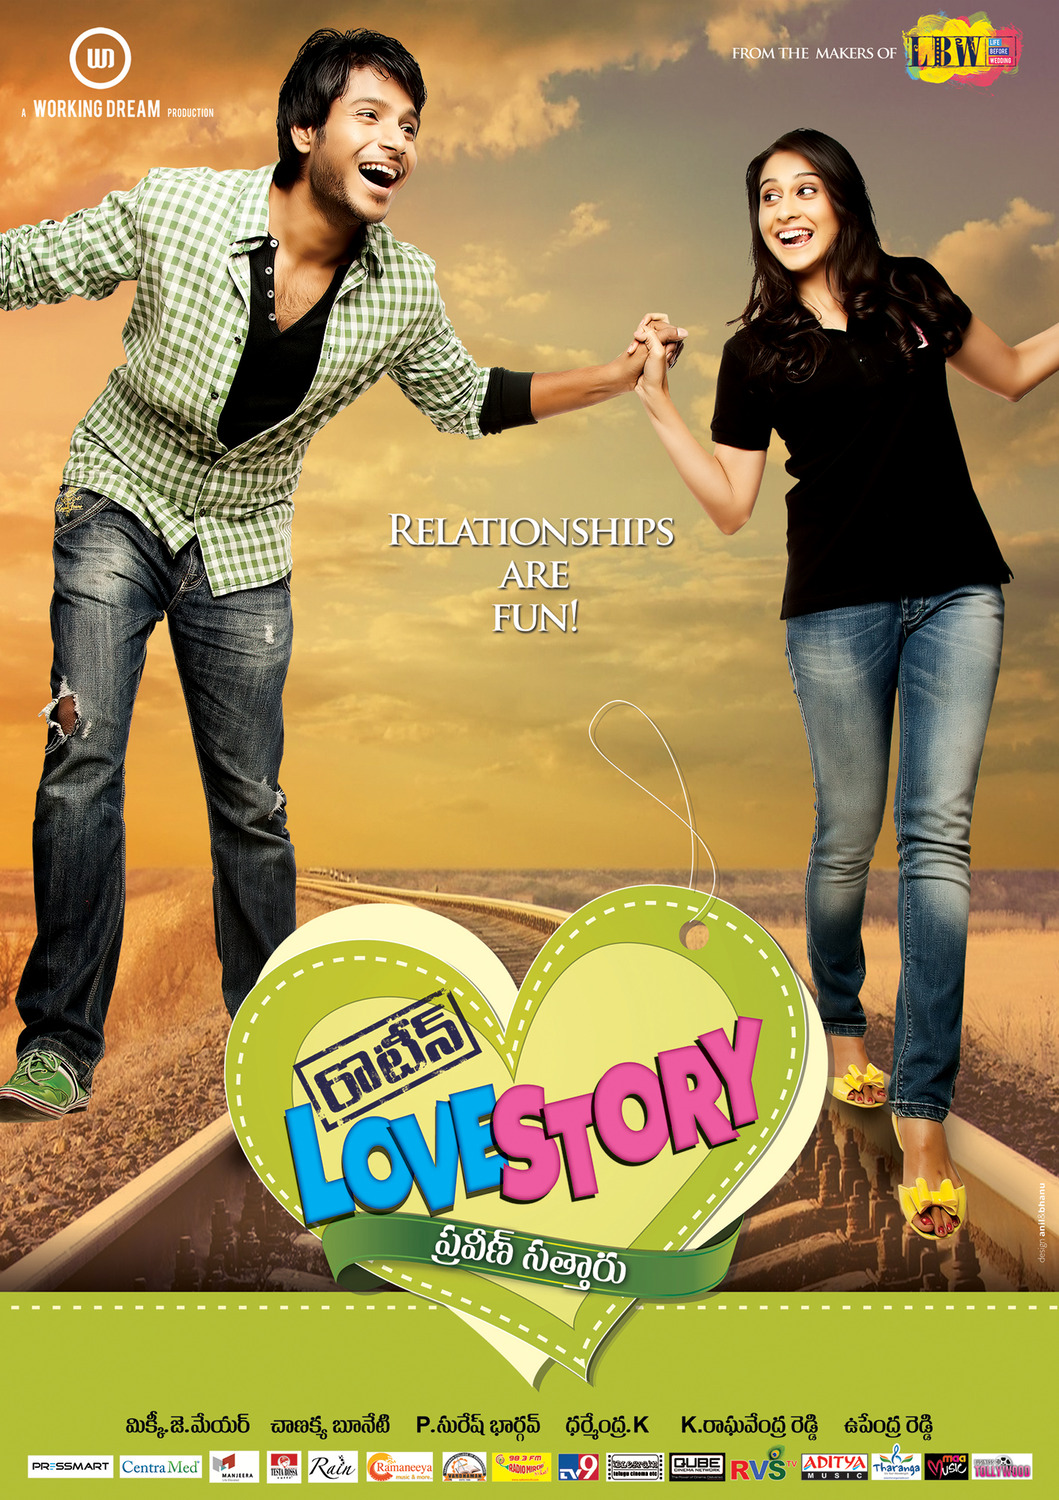 Extra Large Movie Poster Image for Routine Love Story (#2 of 16)